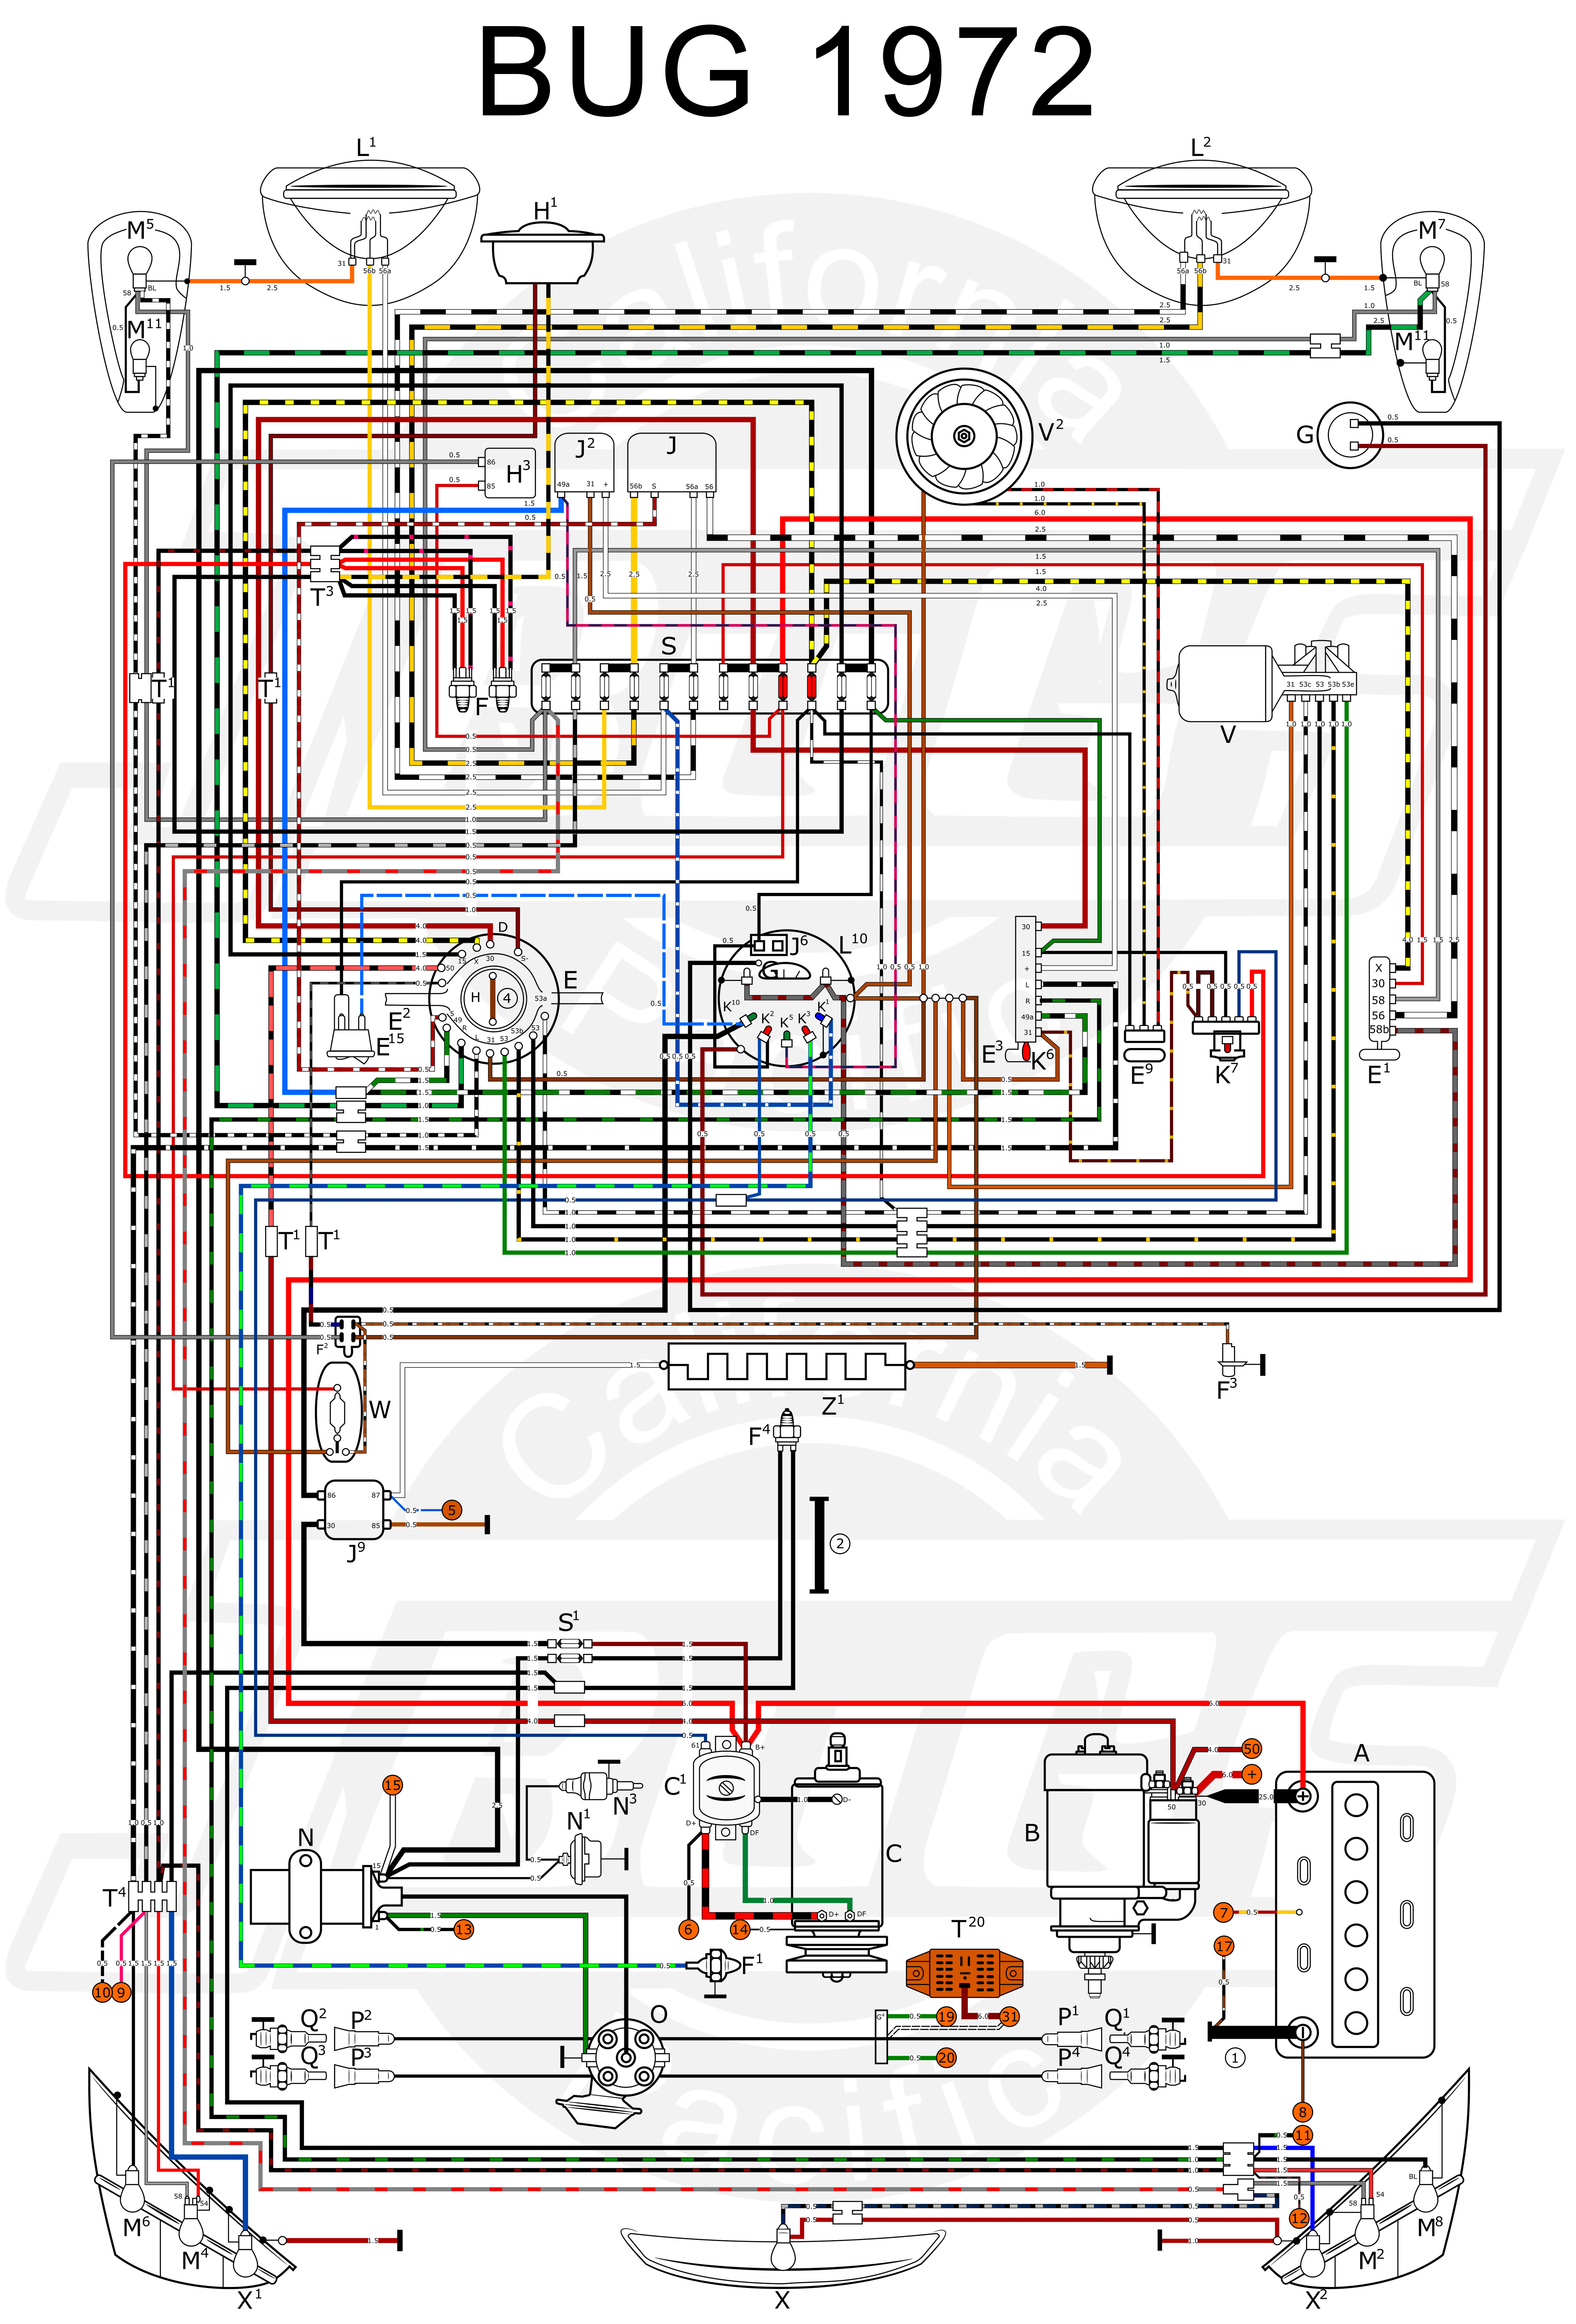 VW Tech Article 1972 Wiring Diagram vw ignition wiring diagram 